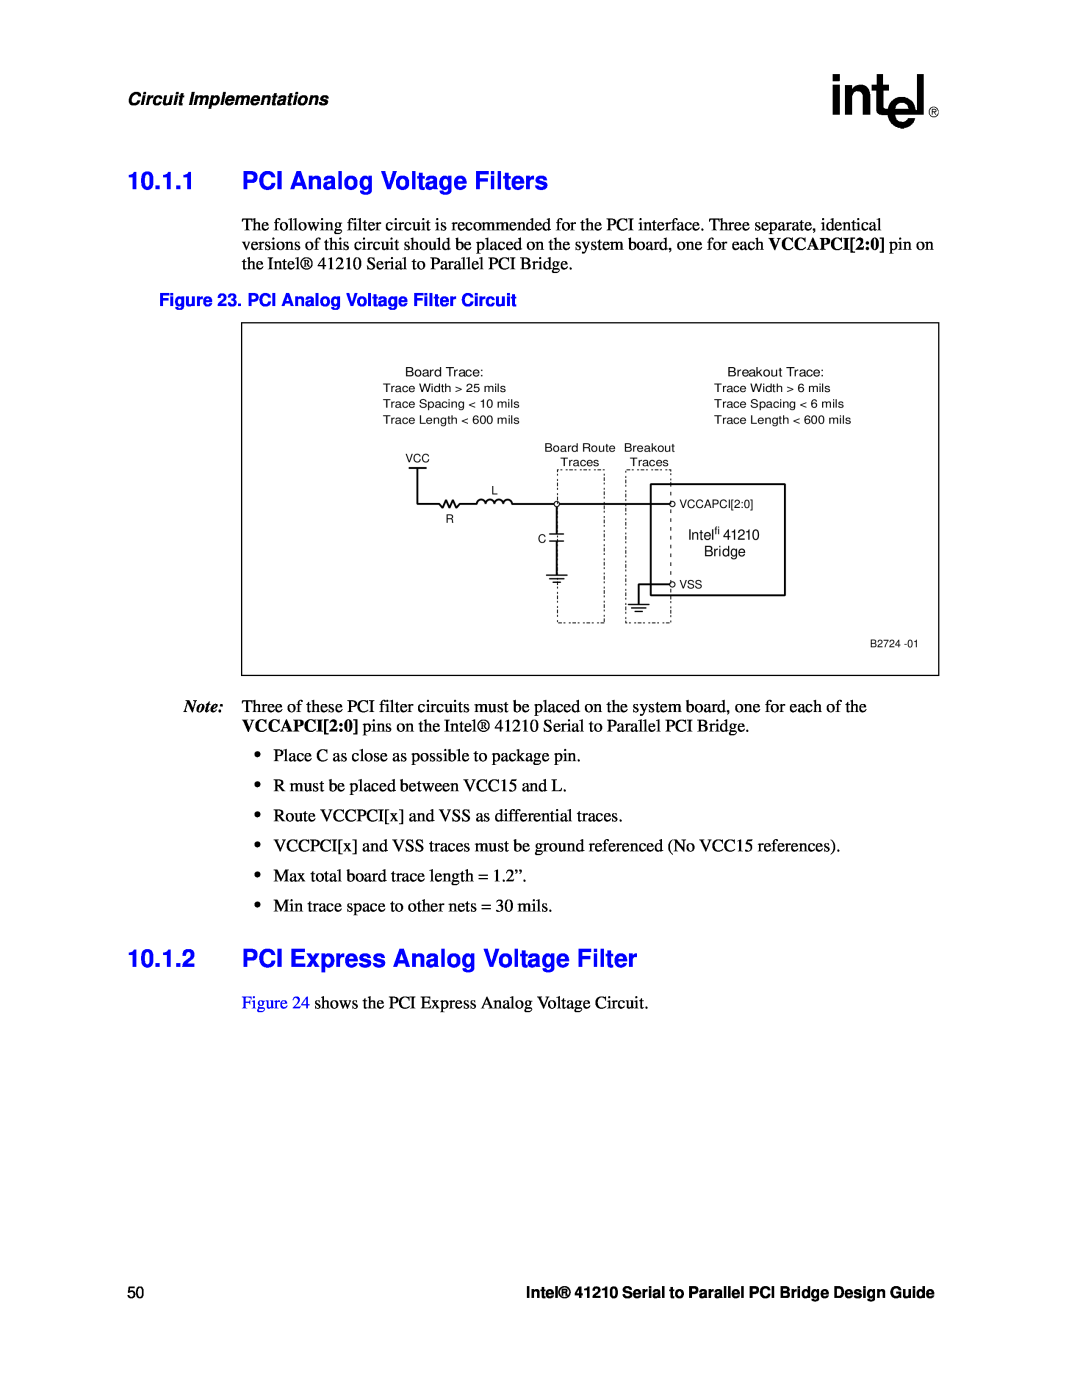 Intel 41210 manual PCI Analog Voltage Filters, PCI Express Analog Voltage Filter, Circuit Implementations 